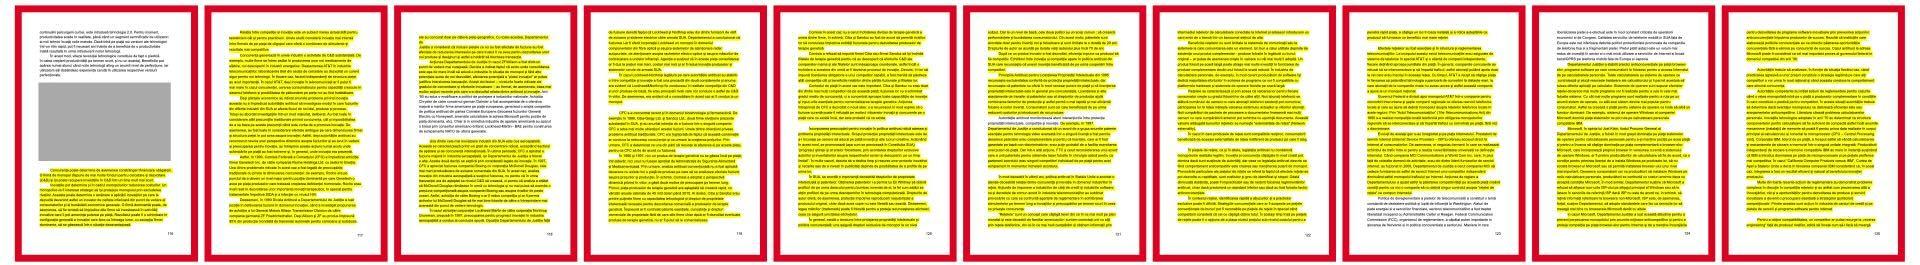 Example of massive plagiarism in Mircea Geoană's thesis. The yellow marks represent plagiarized content from pages 116-125.